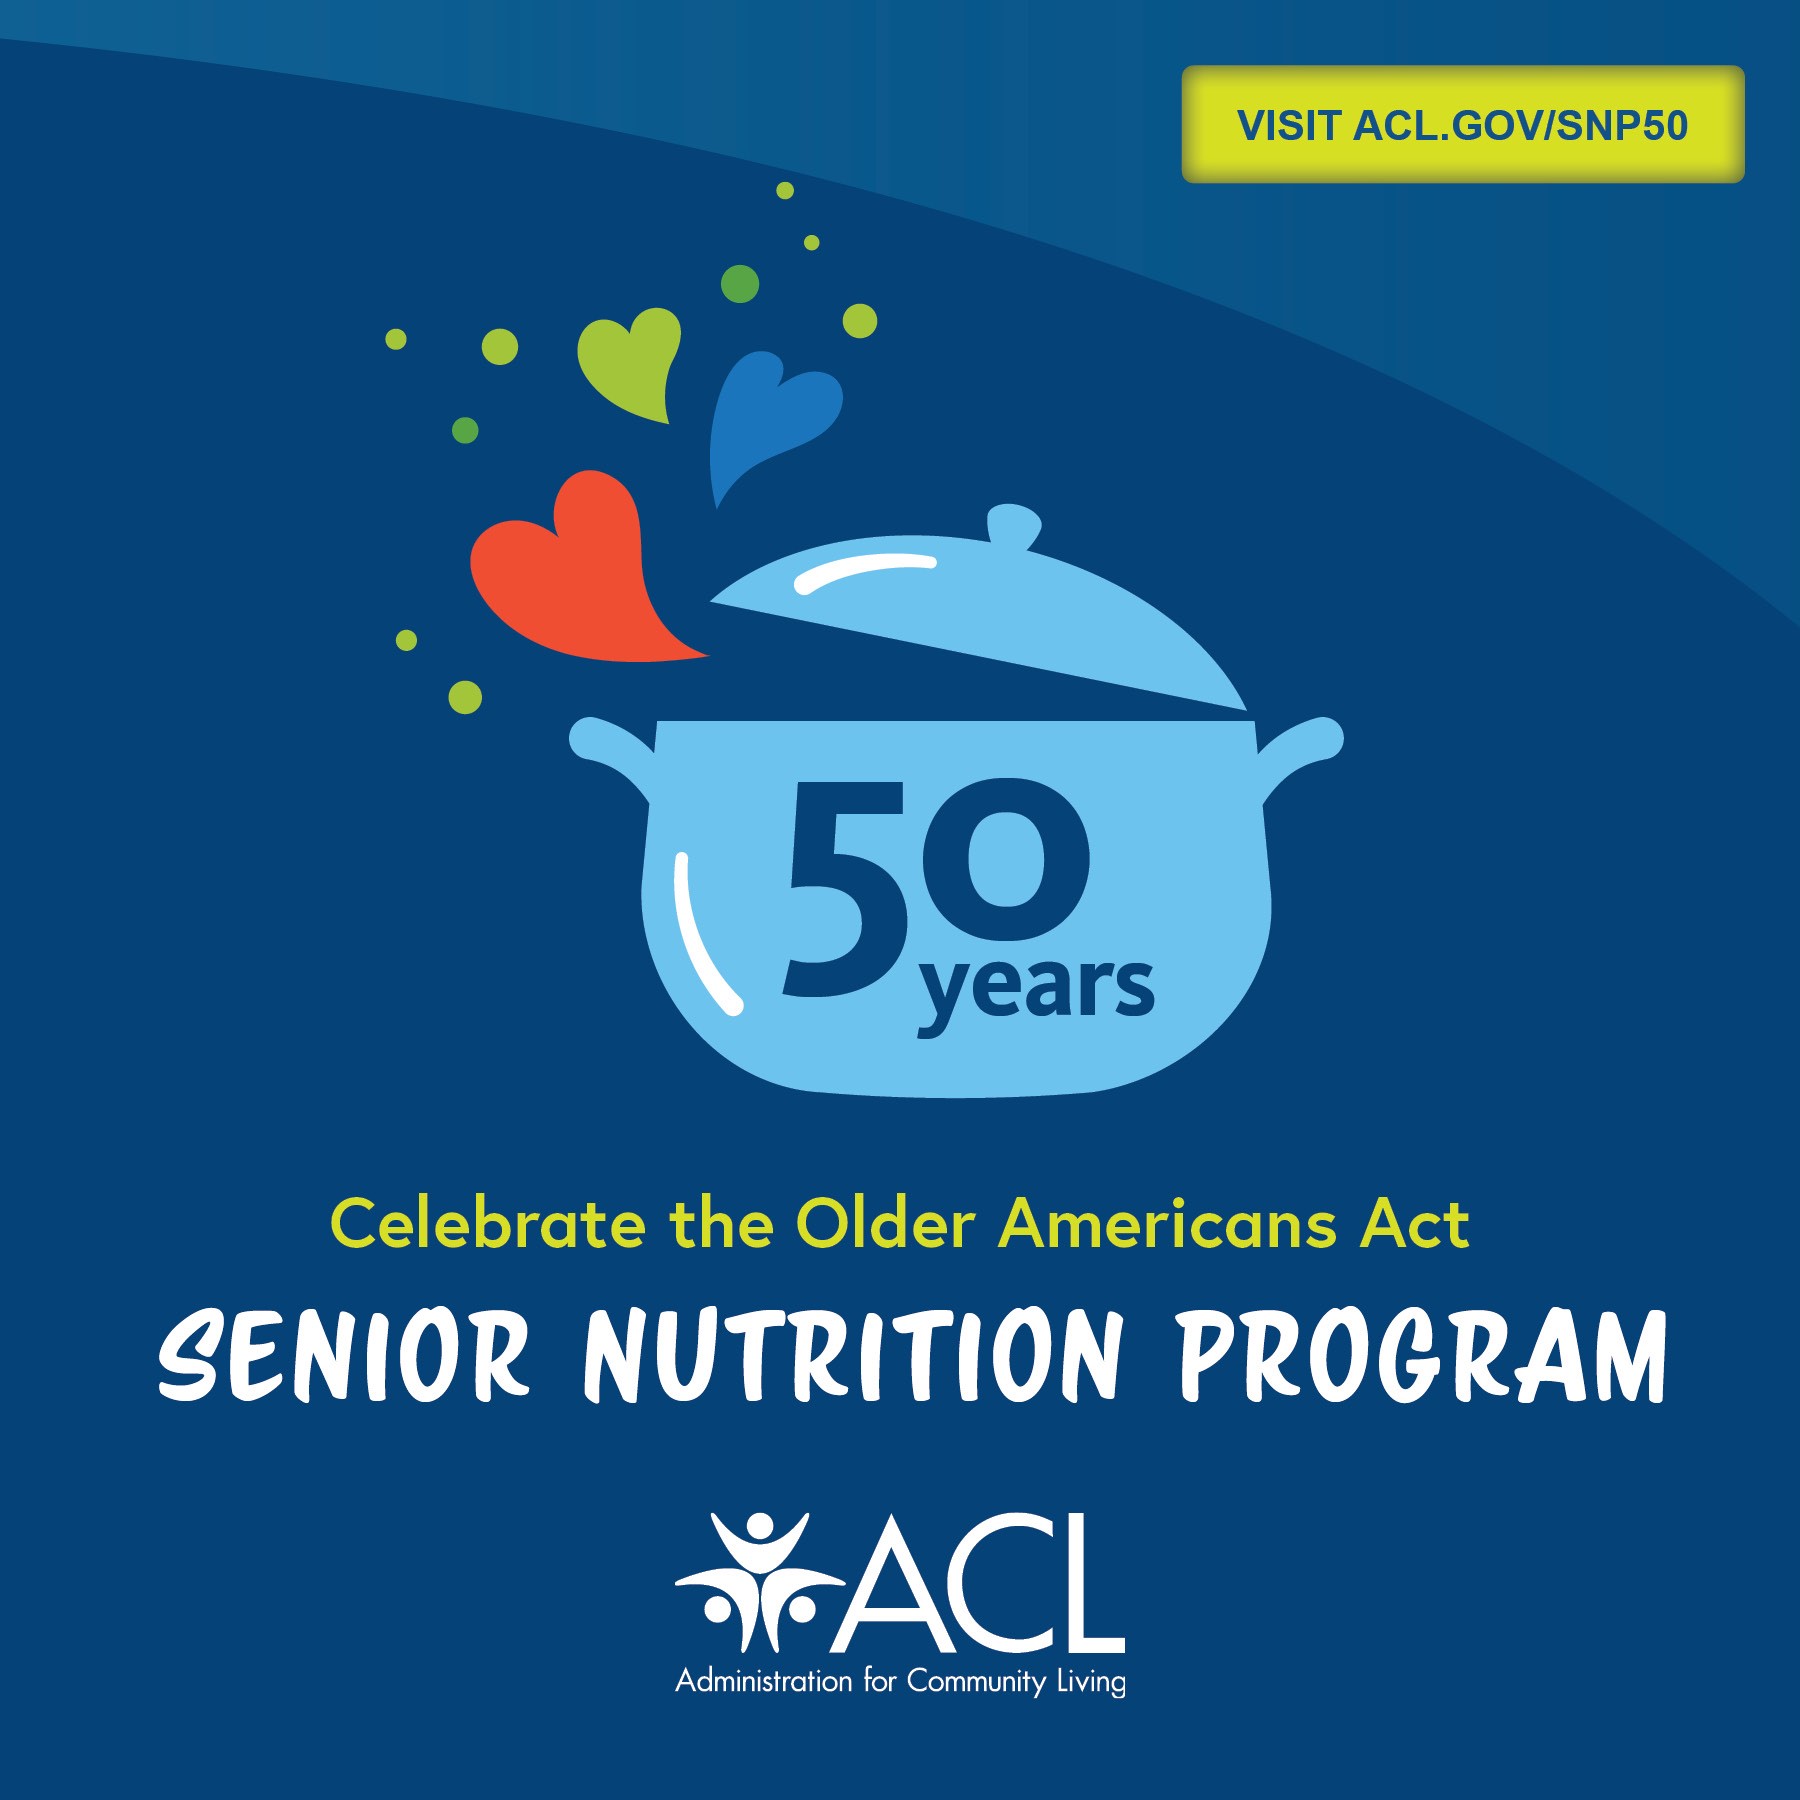 Celebrate 50 years of the Senior Nutrition Program. Click to learn more.